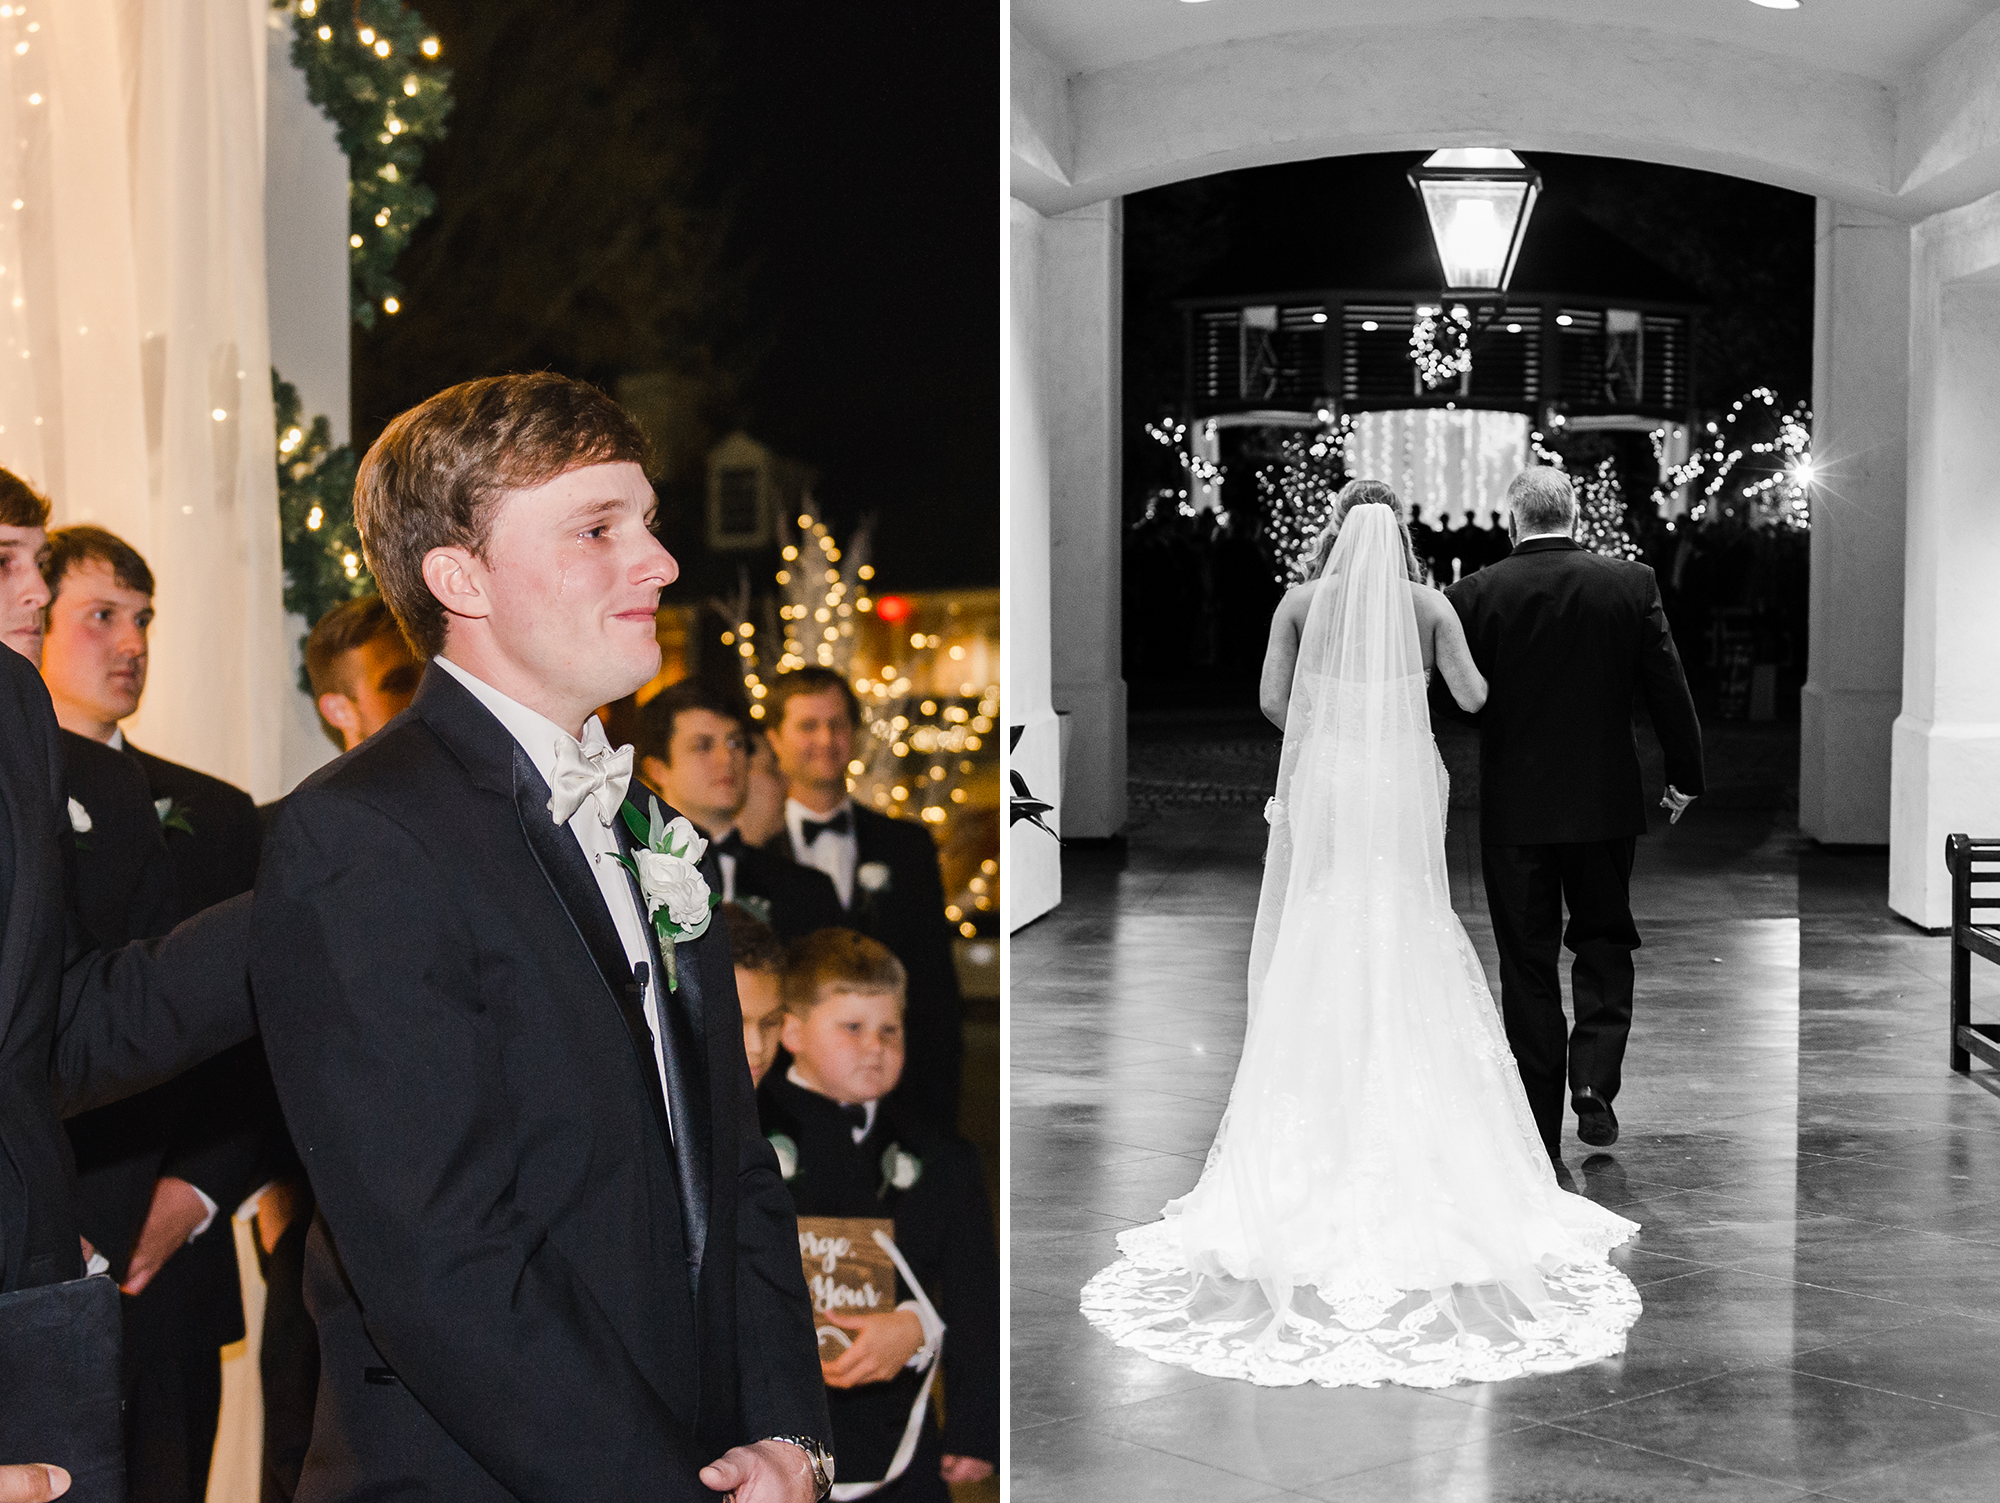 Groom watching as bride walks down aisle with father